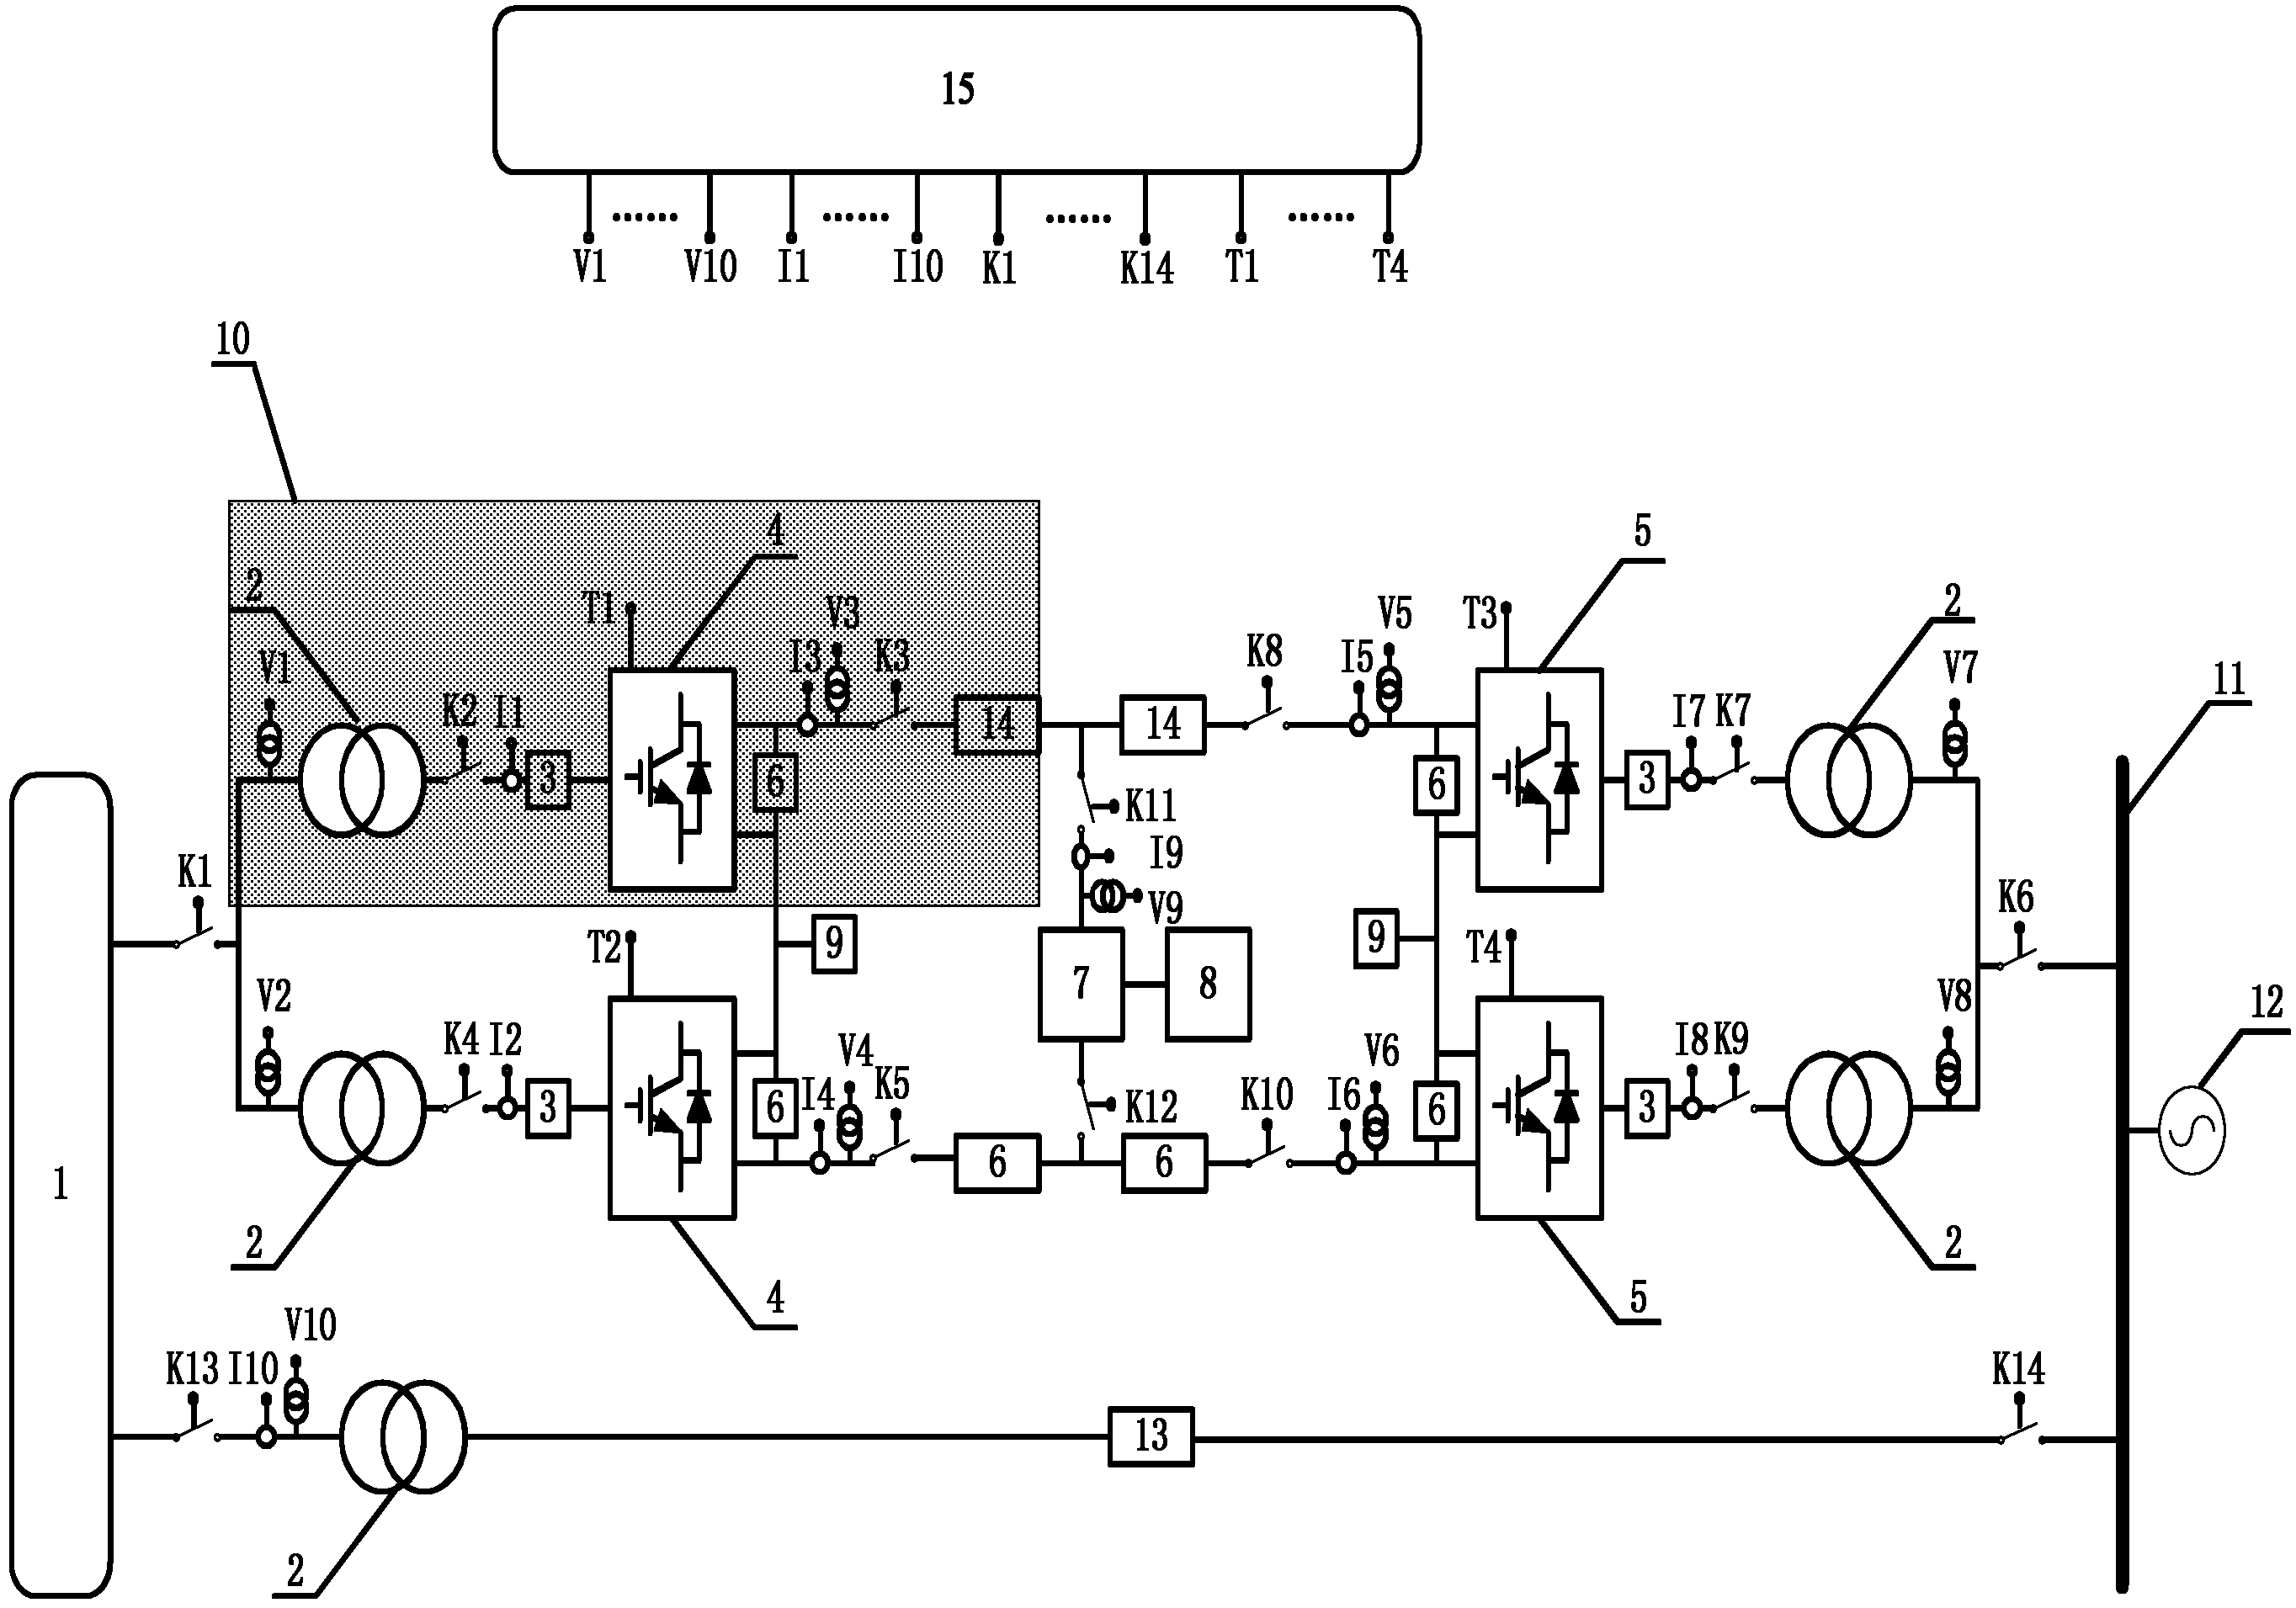 Movable model device of system of offshore wind power synchronized through flexible DC (Direct Current) power transmission